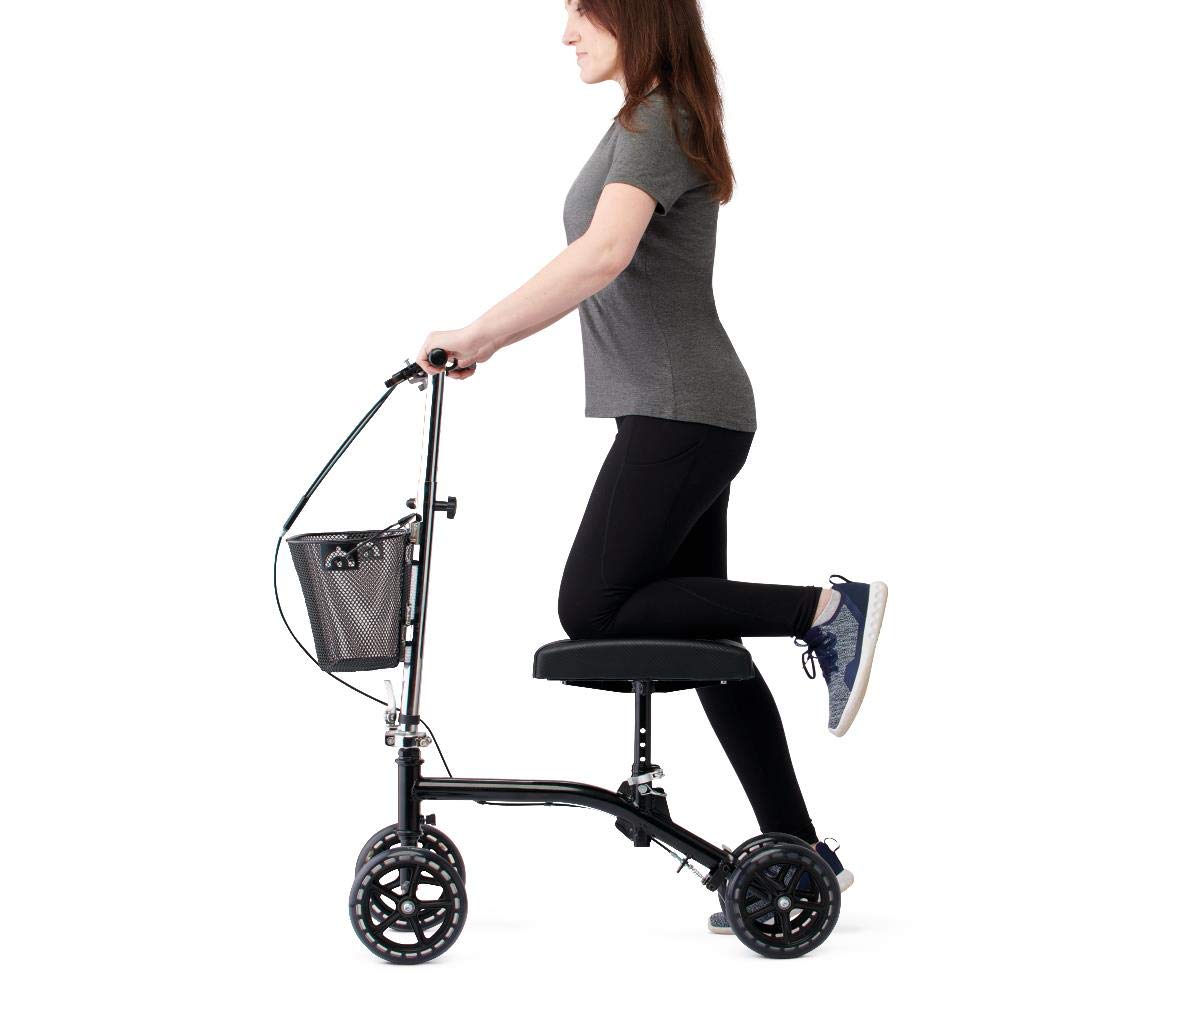 Is an excellent mobility device for foot or ankle injuries that prevent the patient from supporting any weight below the knee.